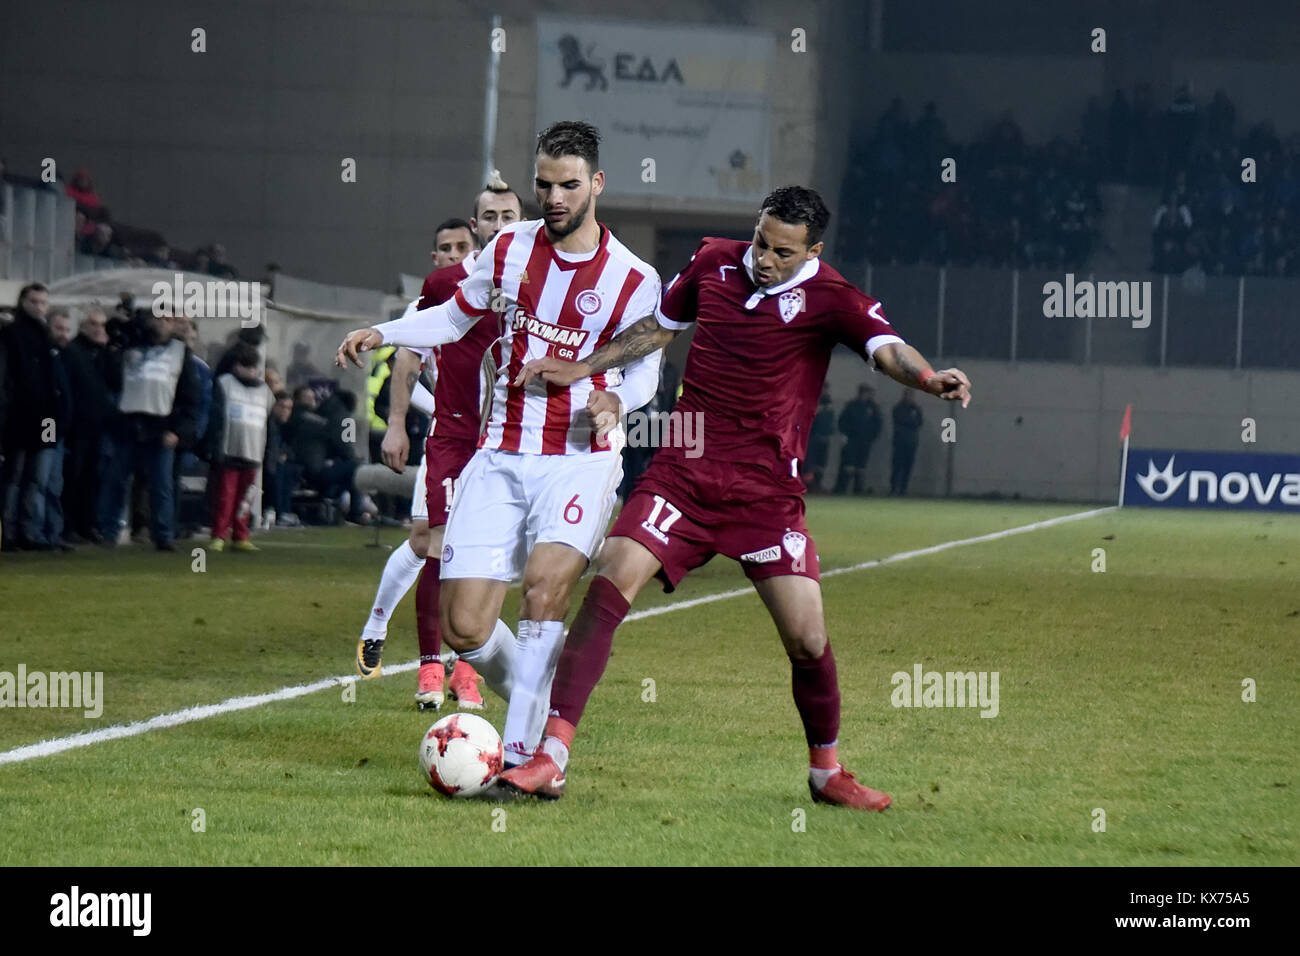 January 7, 2018 - Larissa, Greece - Olympiacos FC Midfielder Panagiotis Tachtsidis (Left) in action during a Greek superleague match between AEL FC and Olympiacos FC. Greek Superleague soccer match at the Greek city of Larissa between AEL FC and Olympiacos FC. The result of the was 0-3 with the victory of Olympiacos FC, which keeped the lead on the tableboard of the Greek Soccer Championship. (Credit Image: © Giannis Papanikos via ZUMA Wire) Stock Photo